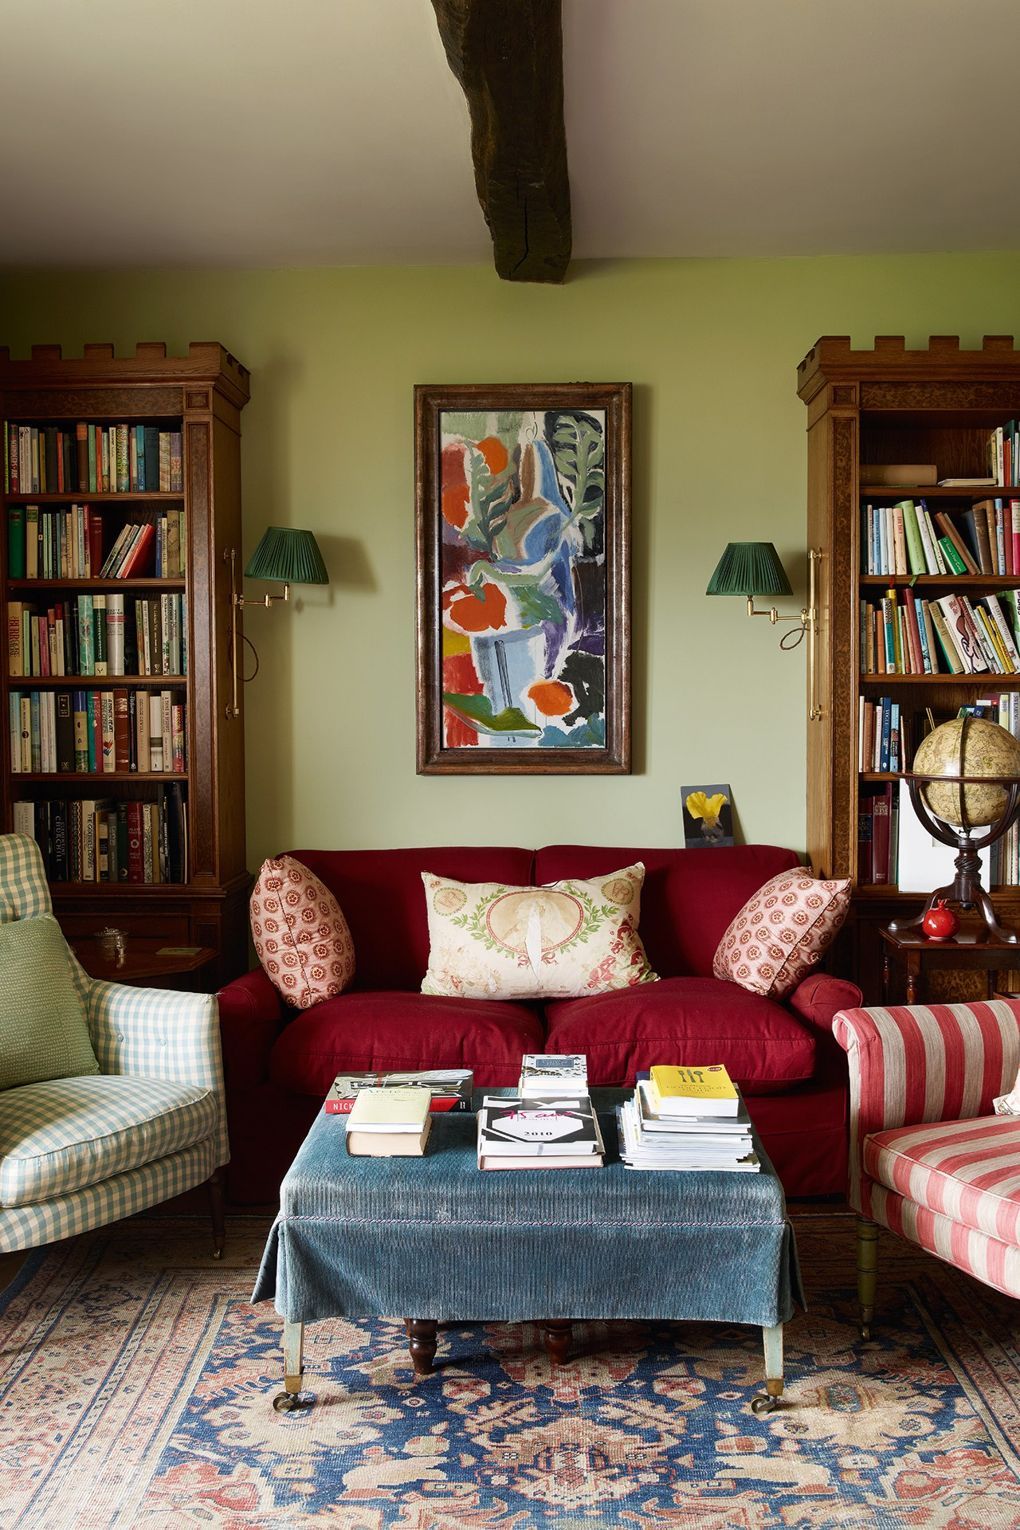 How red sofa adds flavor to your room